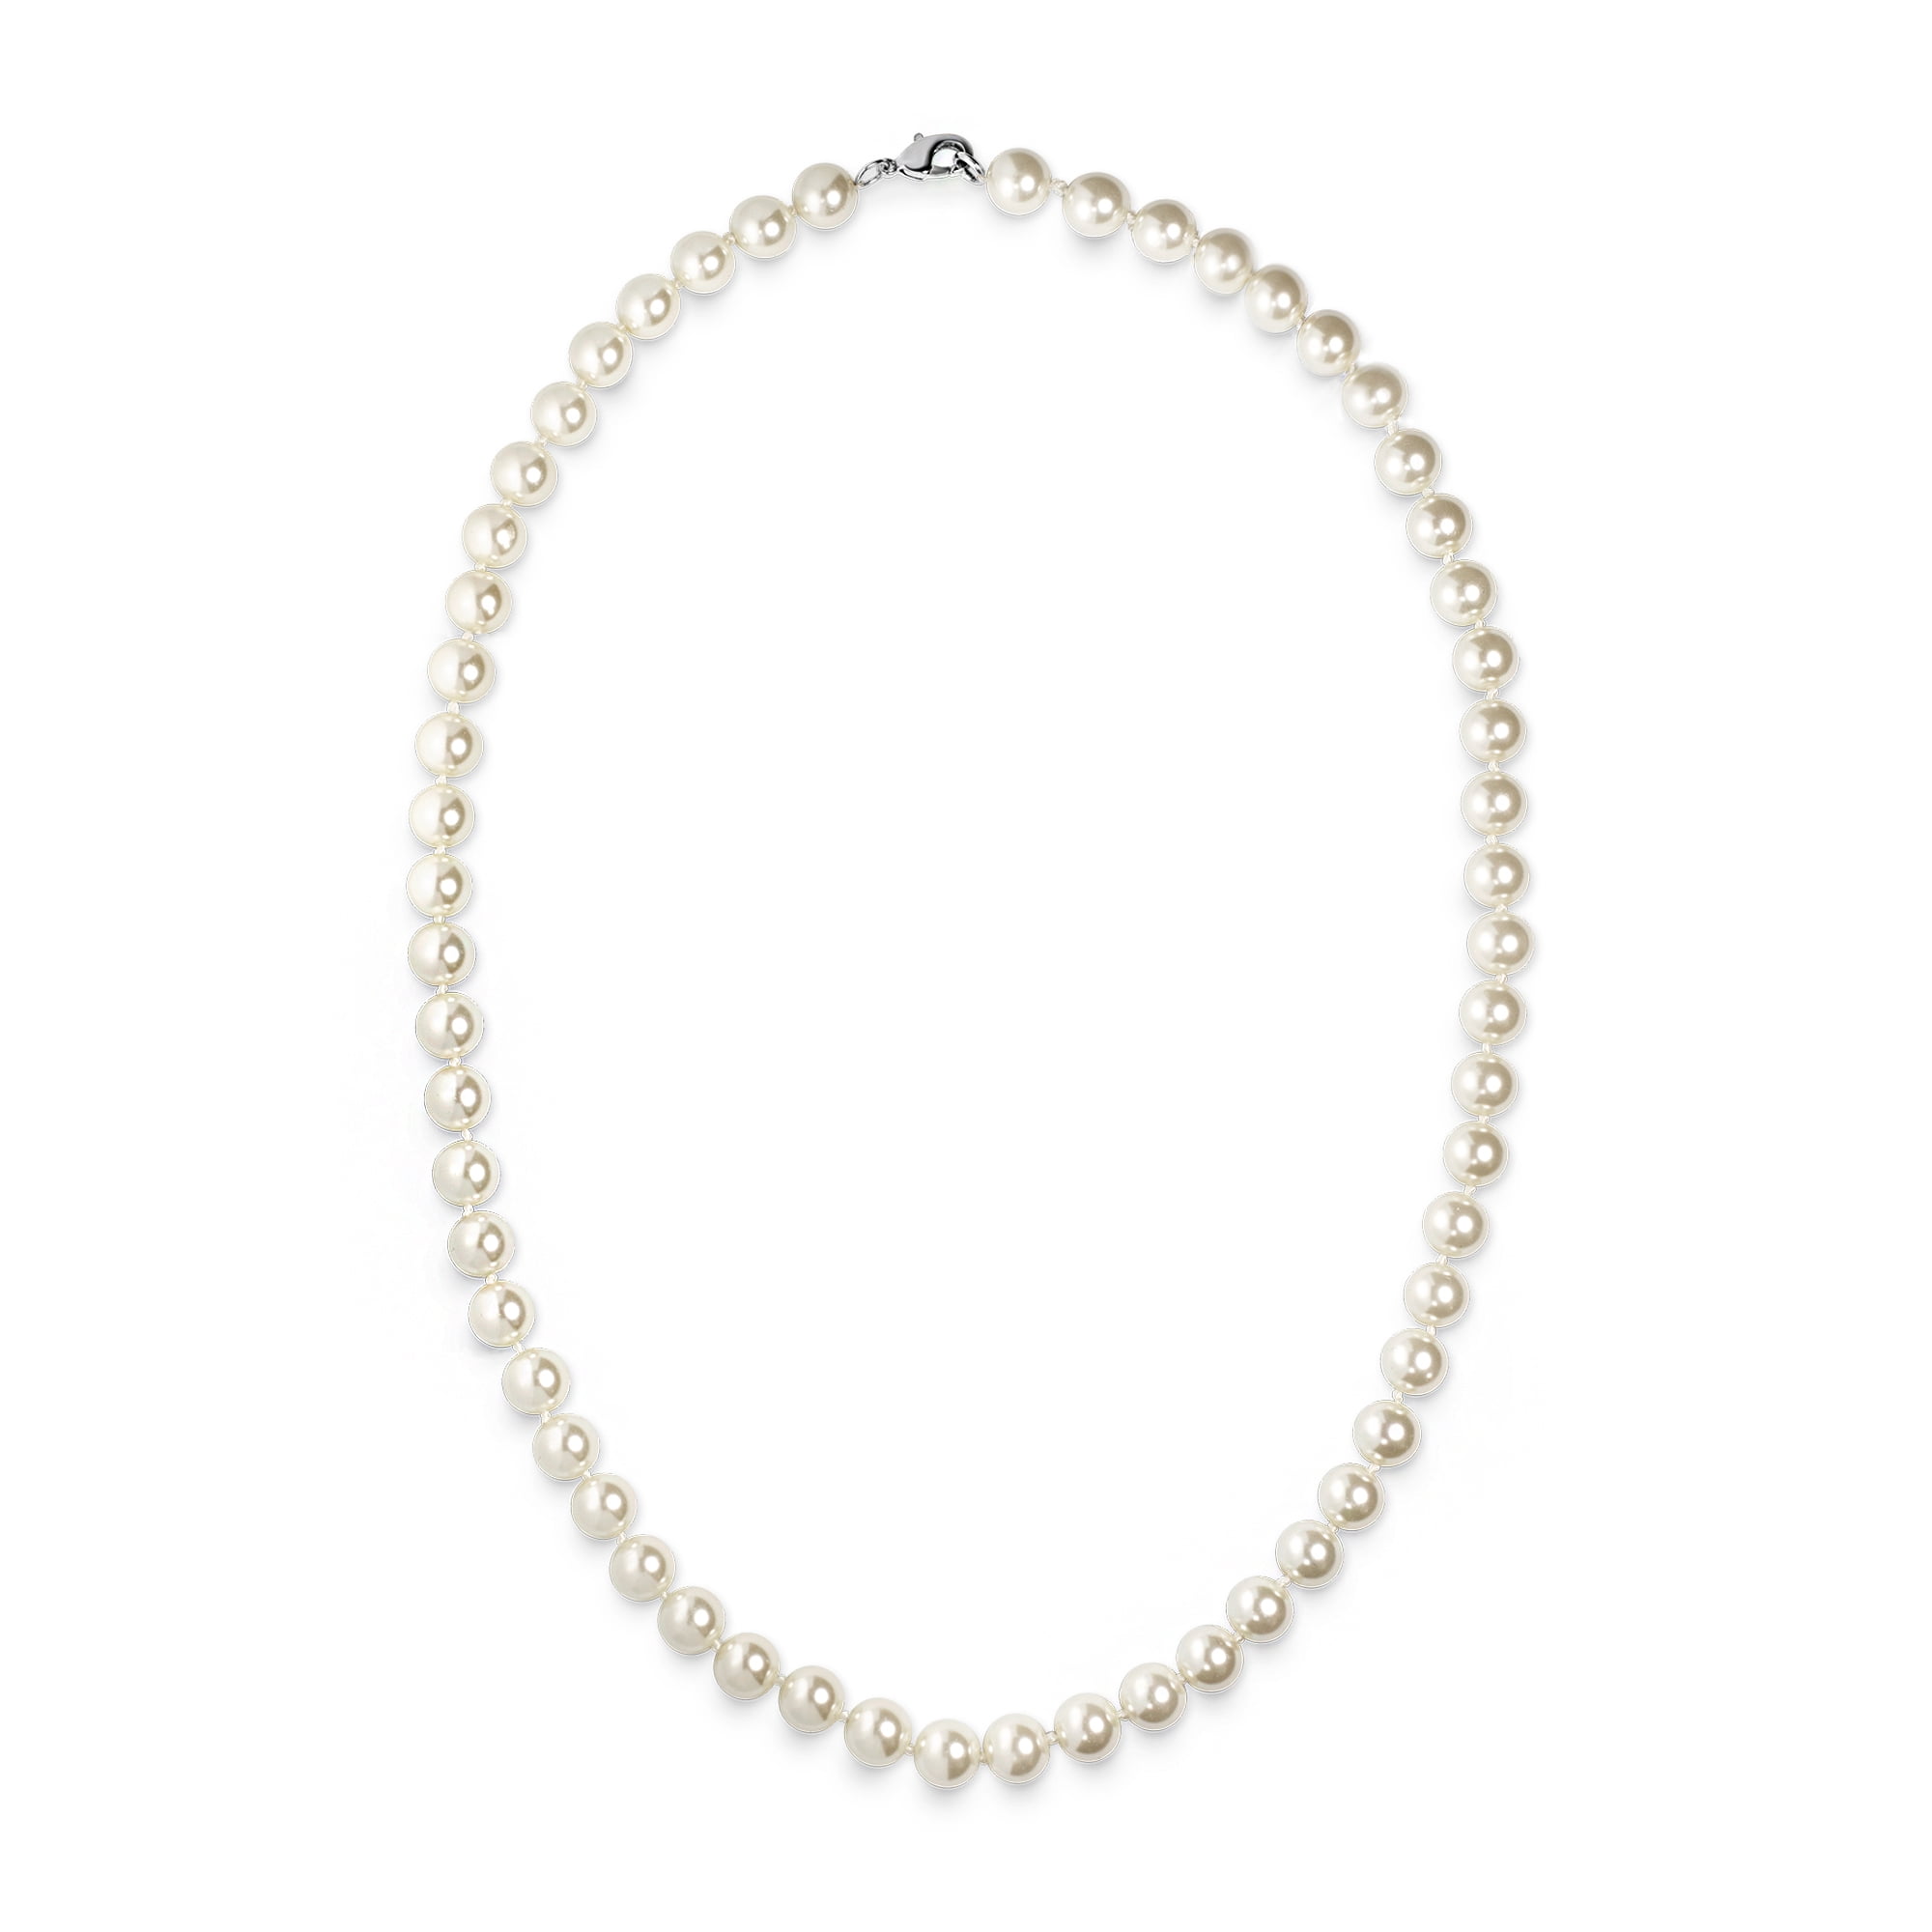 8mm Faux White Pearl Necklace 20"